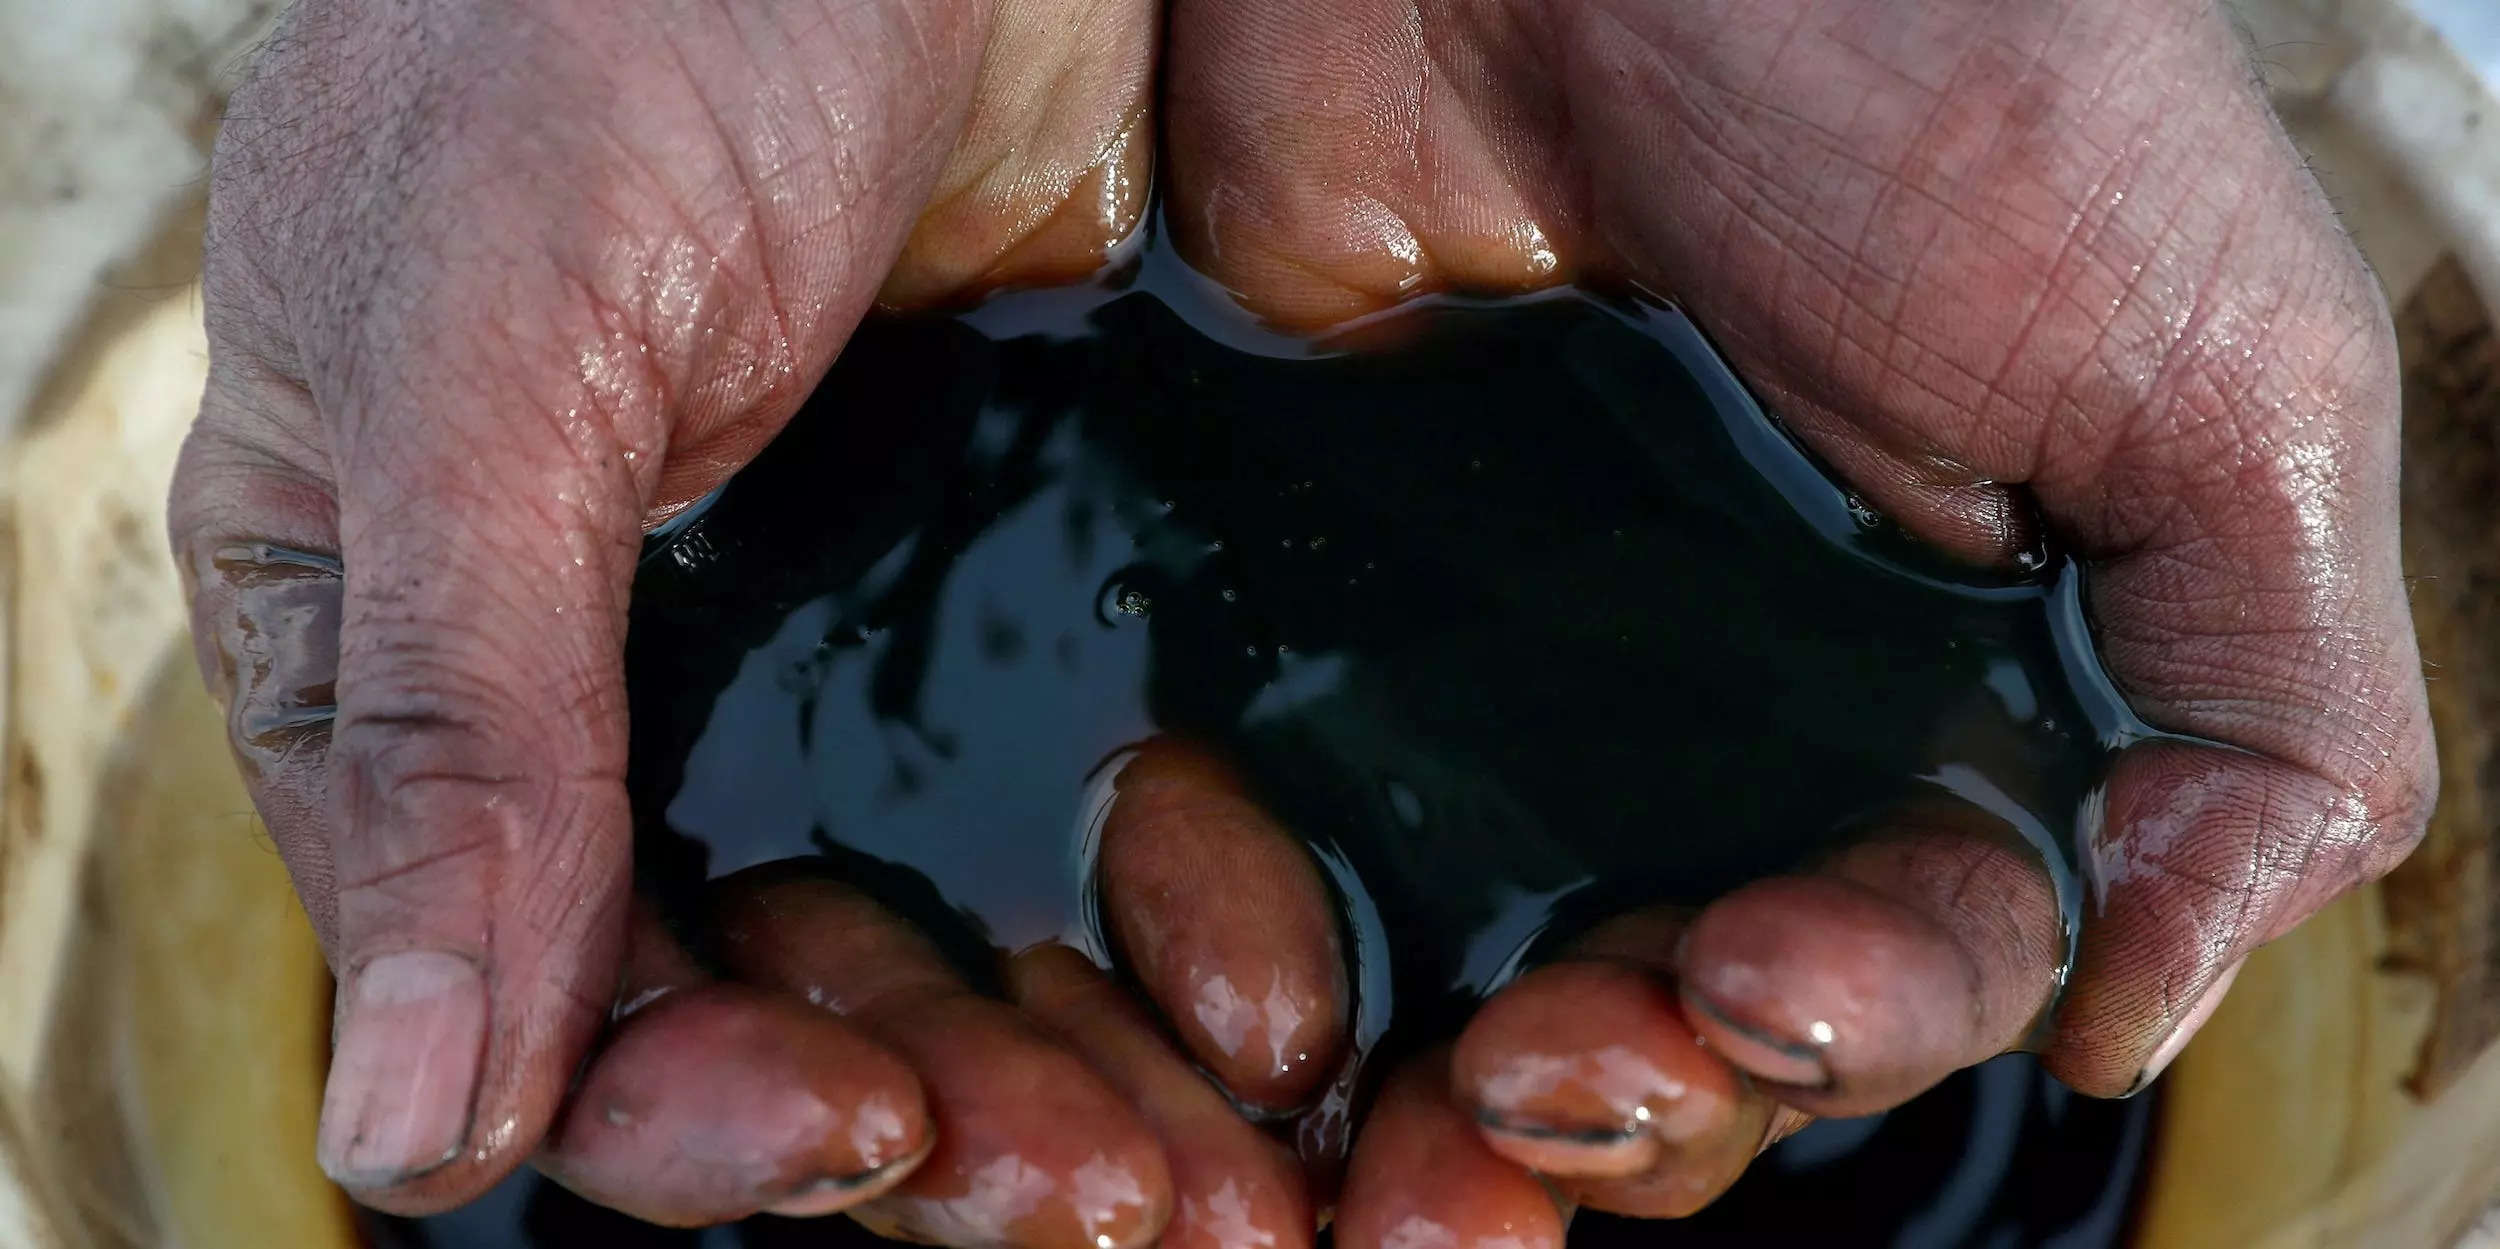 pair of hands cupped holding crude oil